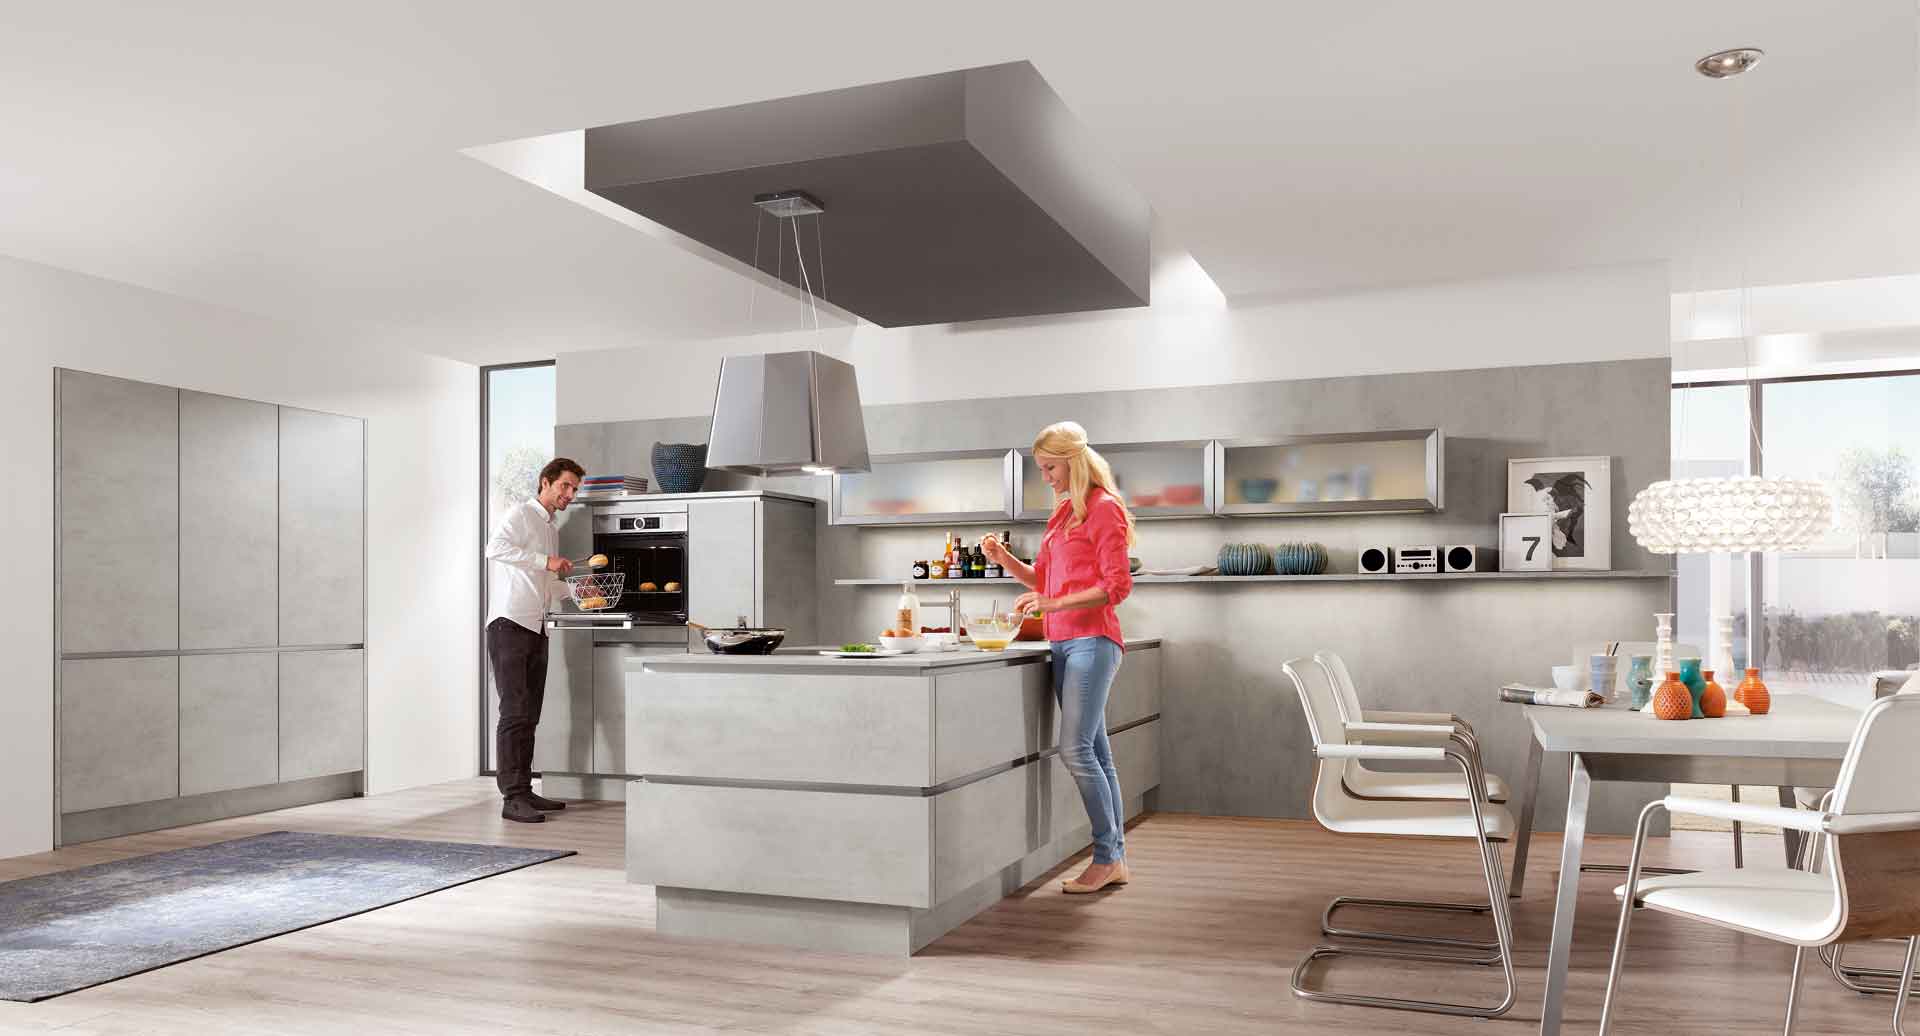 The Convenience and Style of Push to Open Kitchen Cabinets - German Kitchens